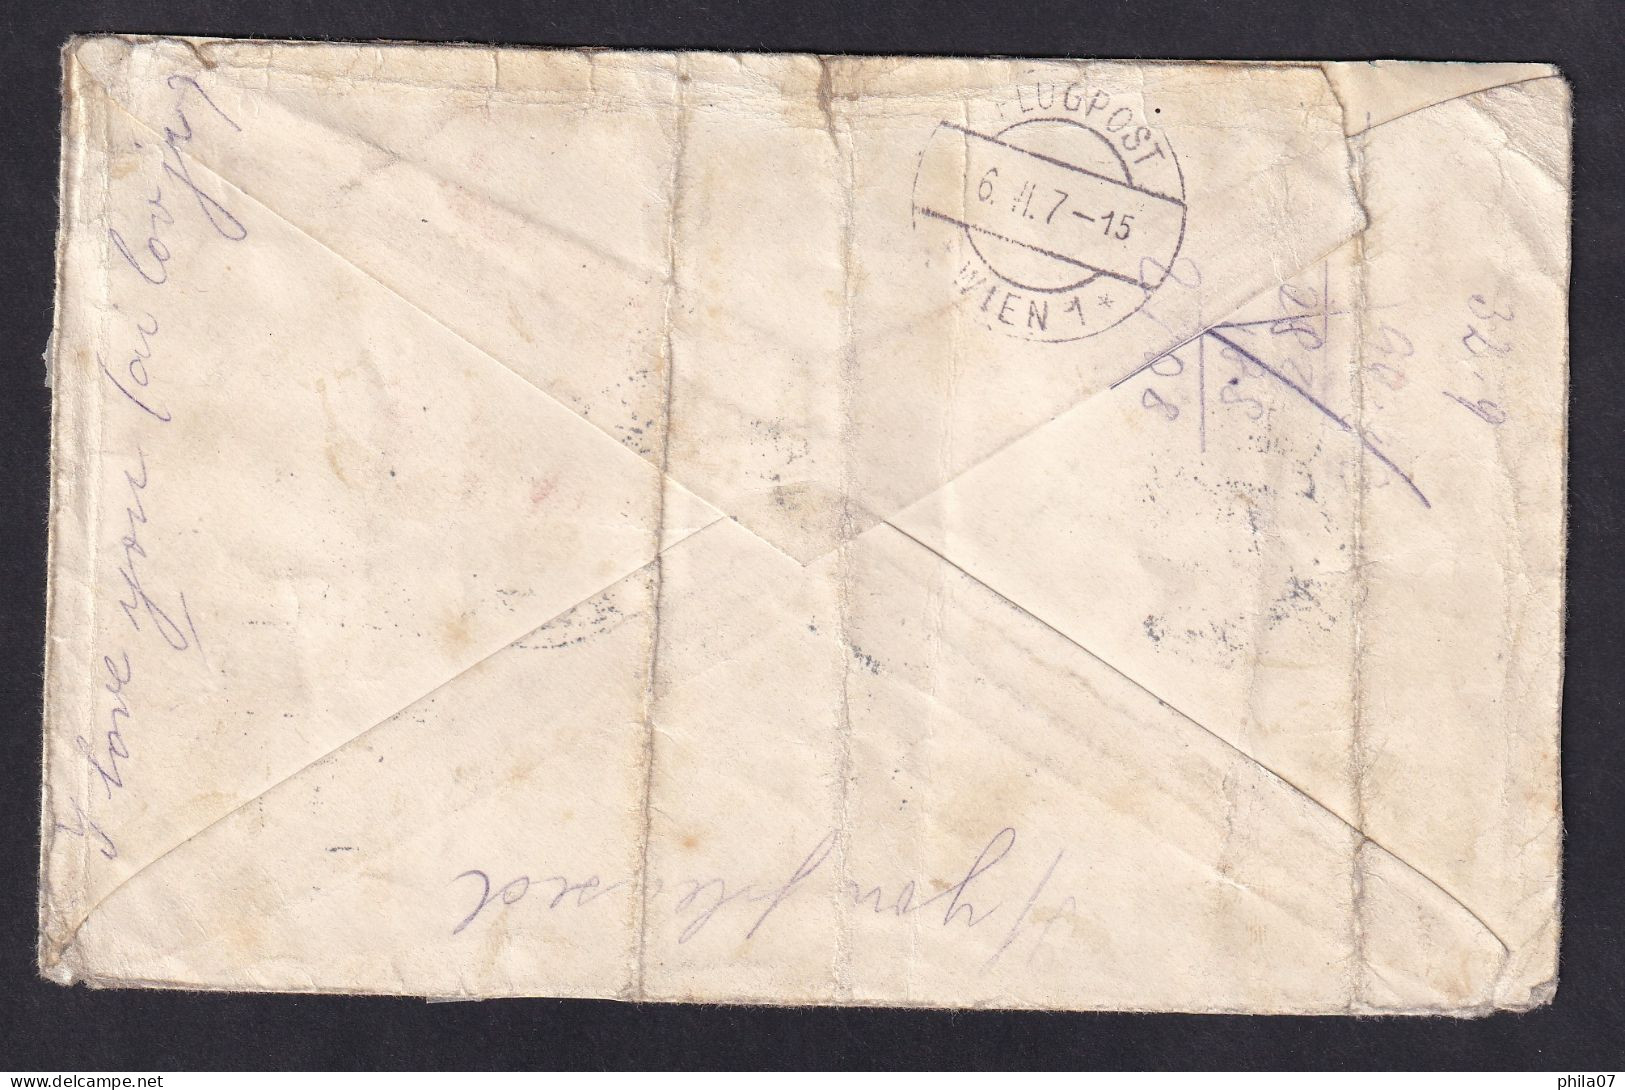 AUSTRIA - Letter Sent By Airmail From Krakow To Wien 06.06.1915. Rare Envelope And In Poorer Quality. / 2 Scans - Brieven En Documenten